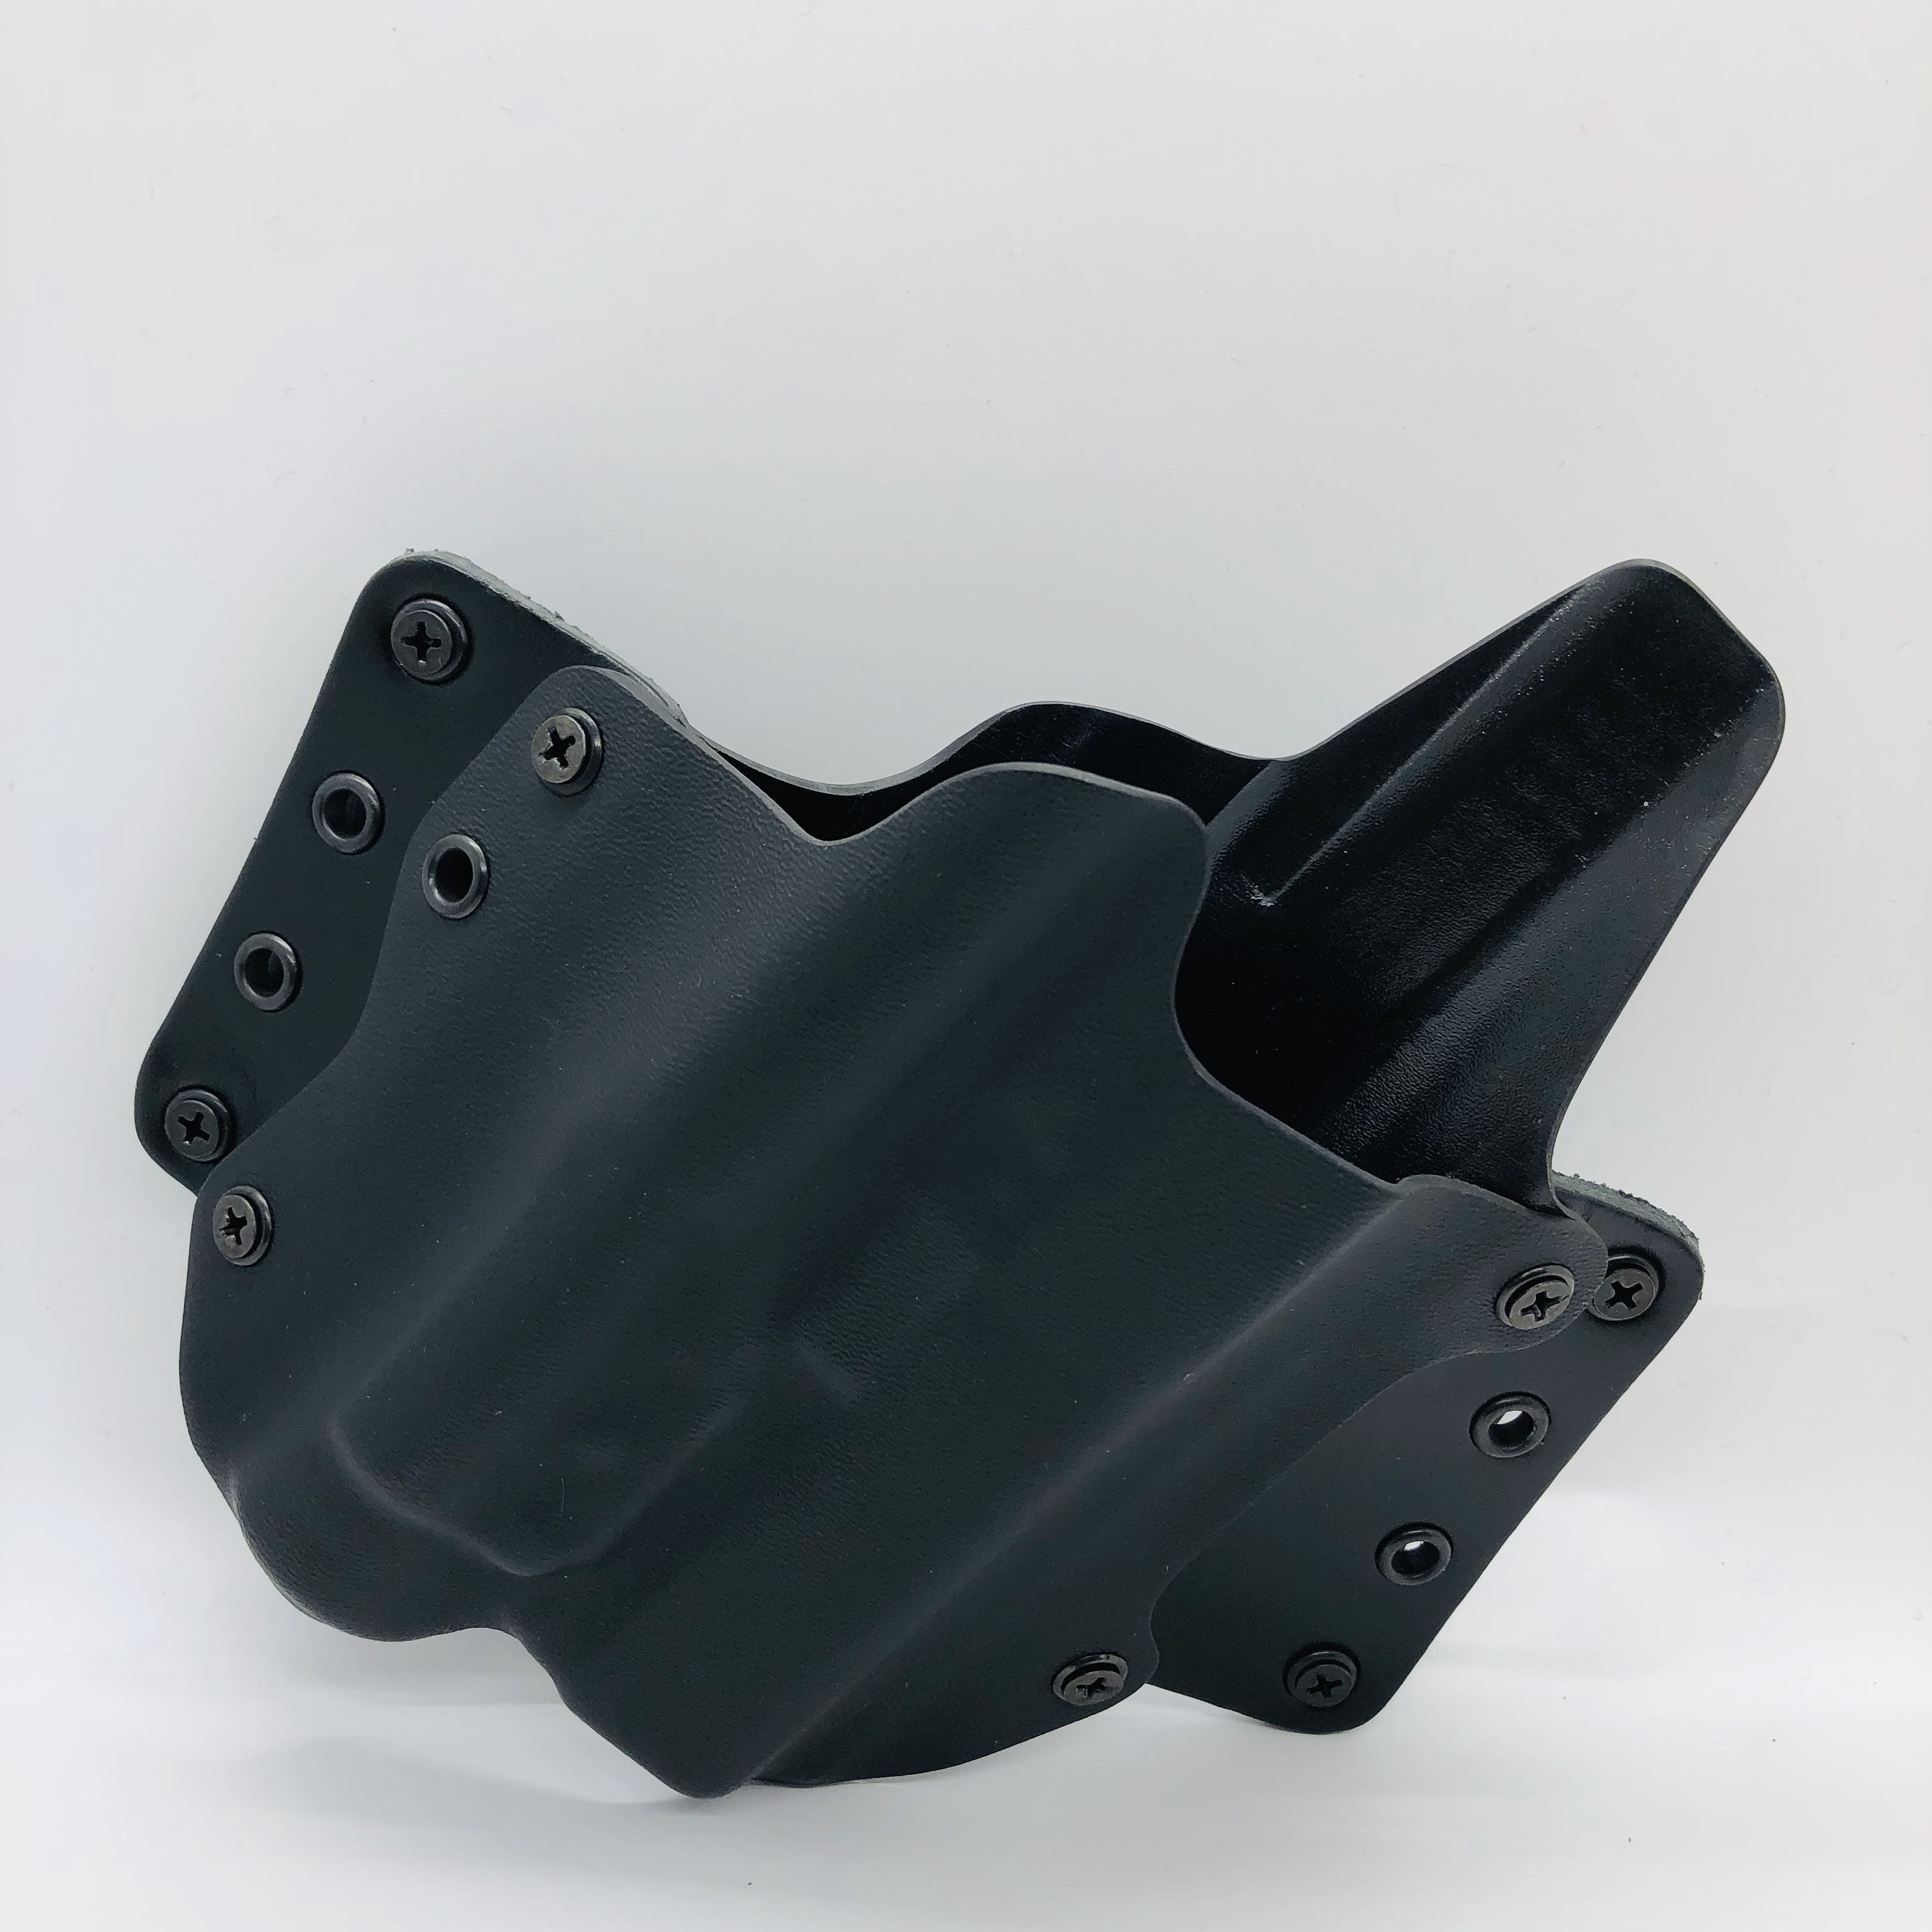 Blackpoint 101003 Leather Wing Light Mounted OWB 1.75" Holster For Glock 20/21 BLK  Blackpoint 101003 Leather Wing Light Mounted OWB 1.75" Holster For Glock 20/21 BLK 